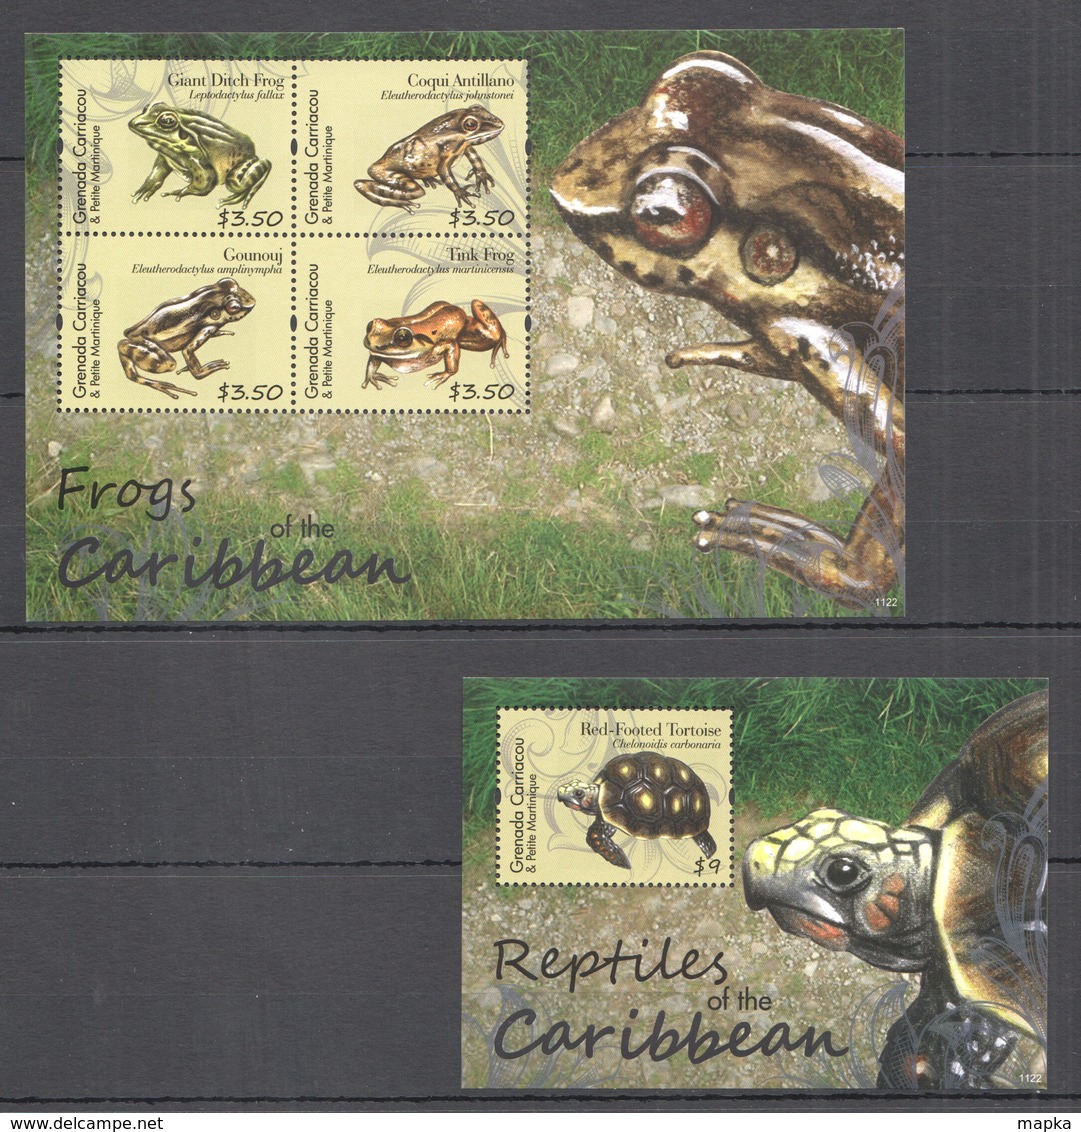 B882 2011 GRENADA CARRIACOU FAUNA REPTILES & FROGS OF THE CARIBBEAN KB+BL MNH - Frogs